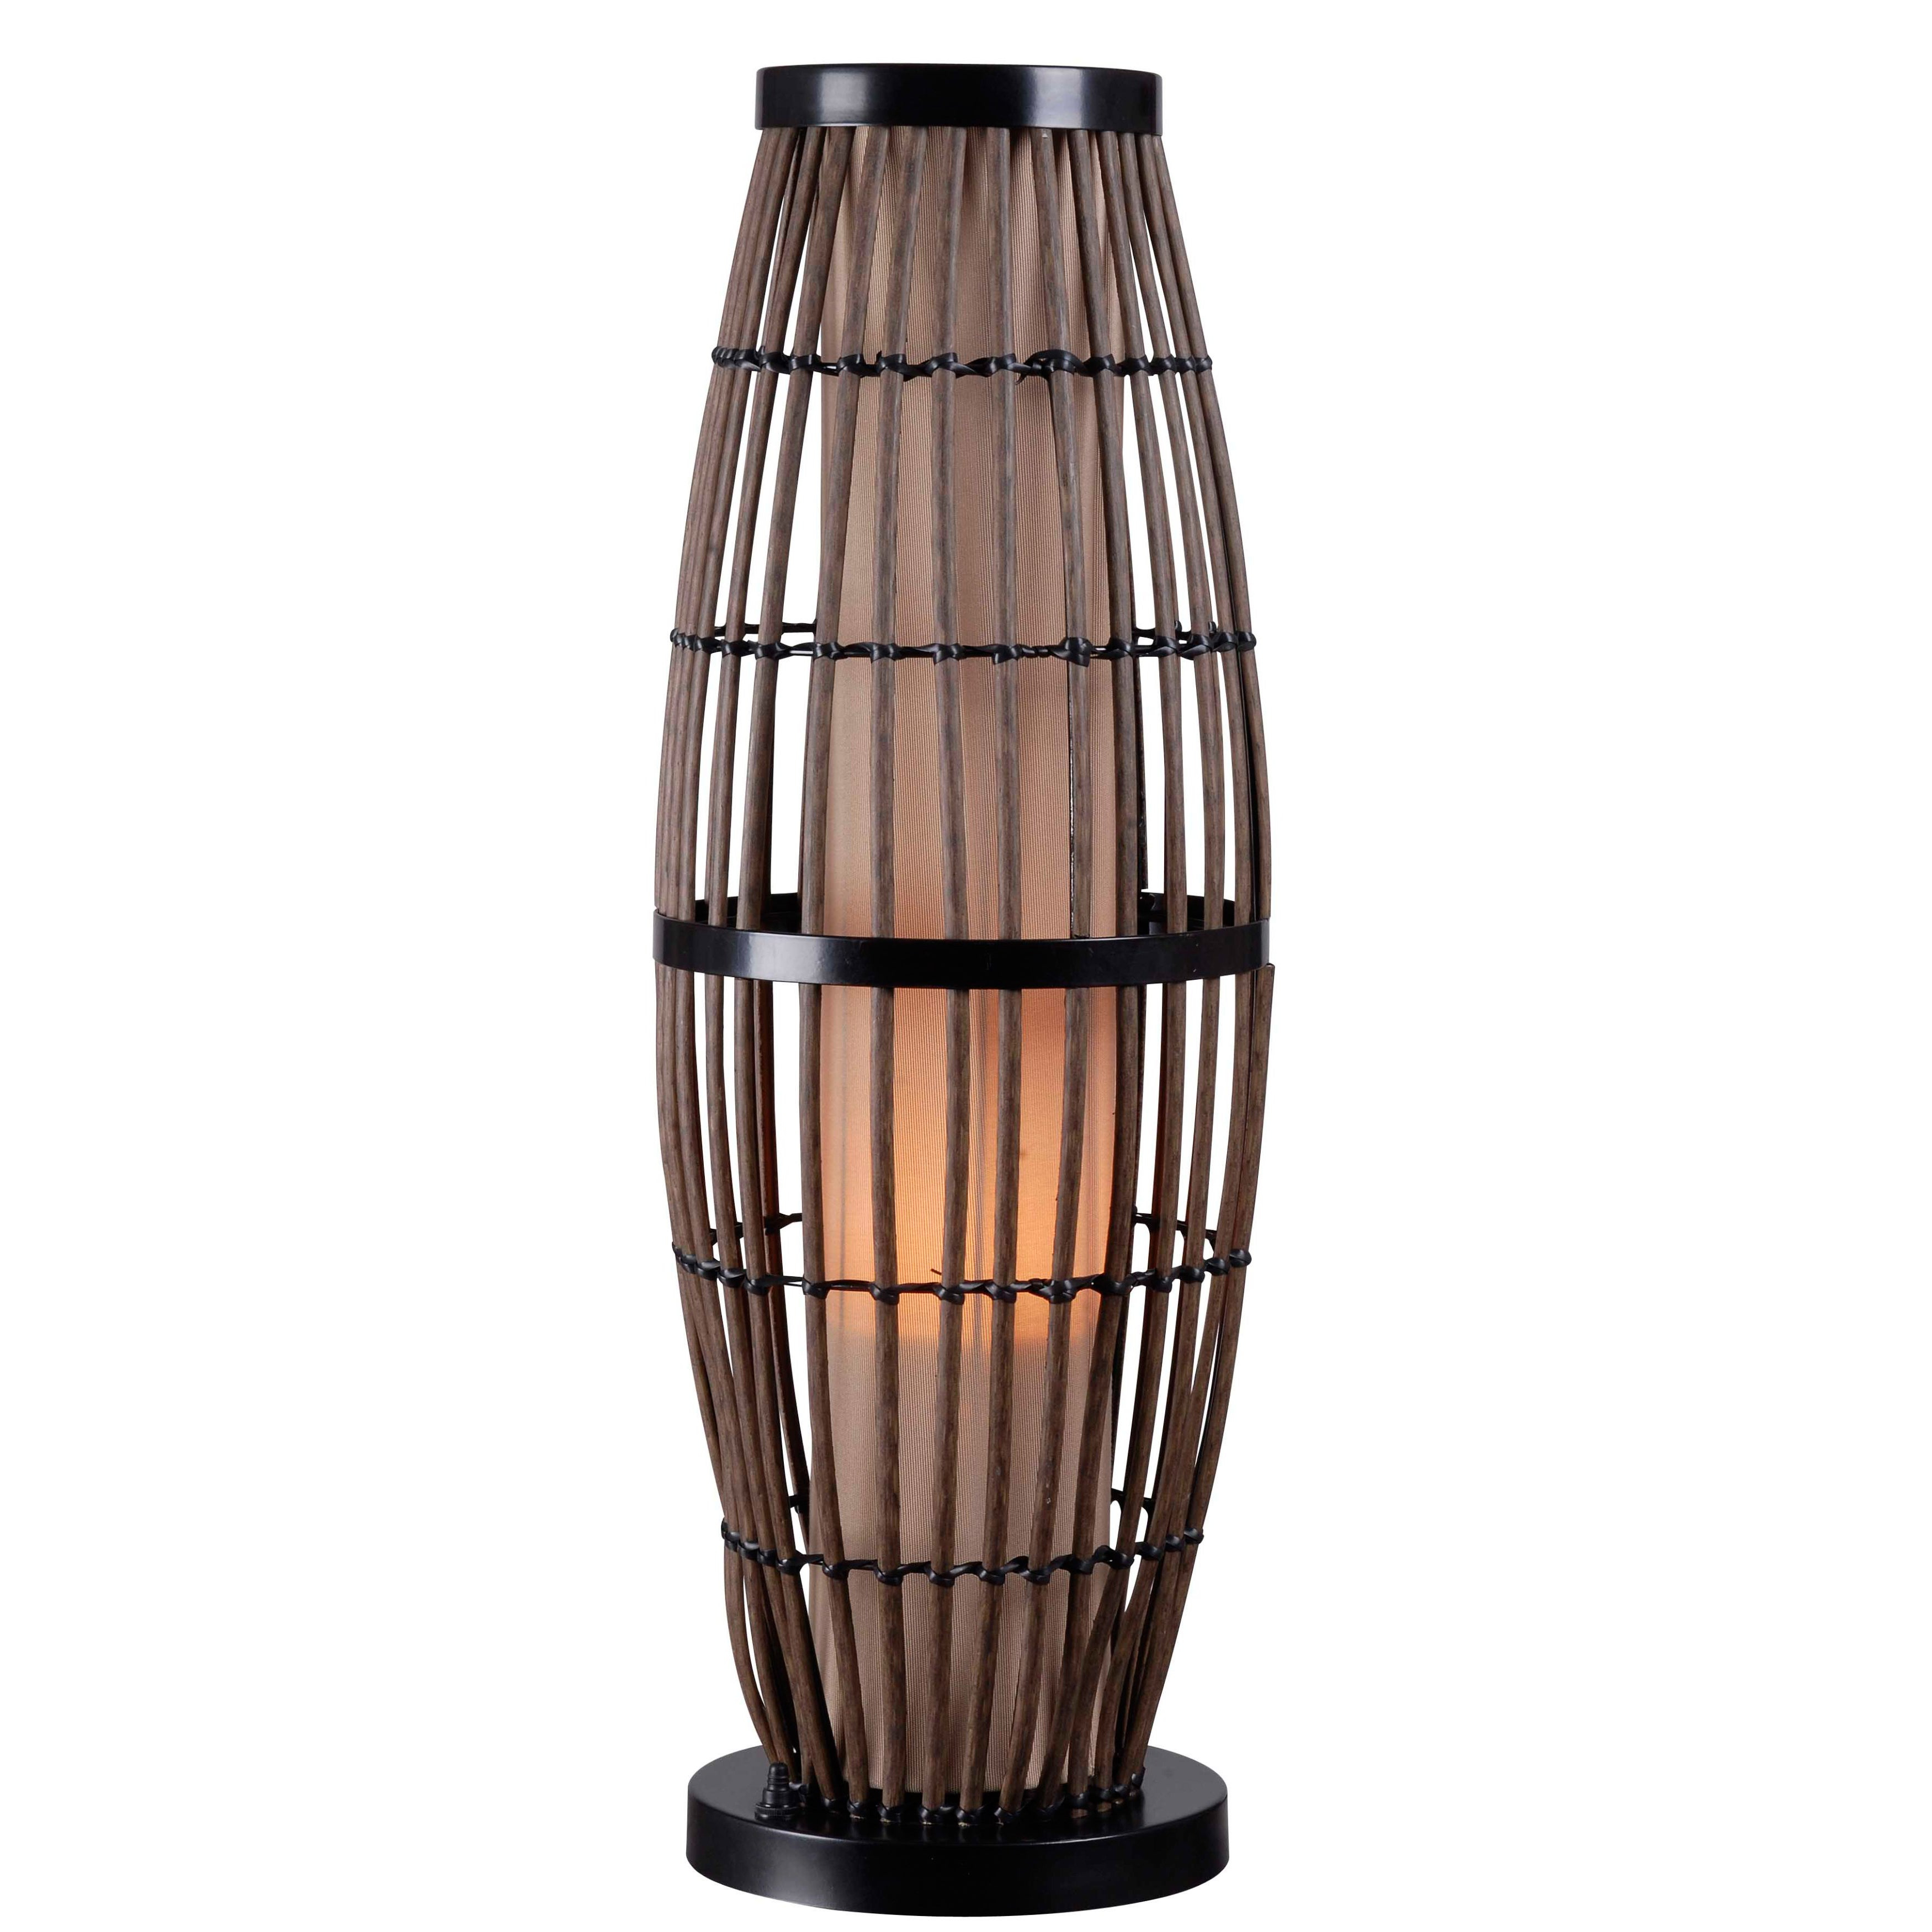 Lavinta Rattan With Black Accents 31 Inch Indoor Outdoor Table Lamp intended for sizing 3500 X 3500